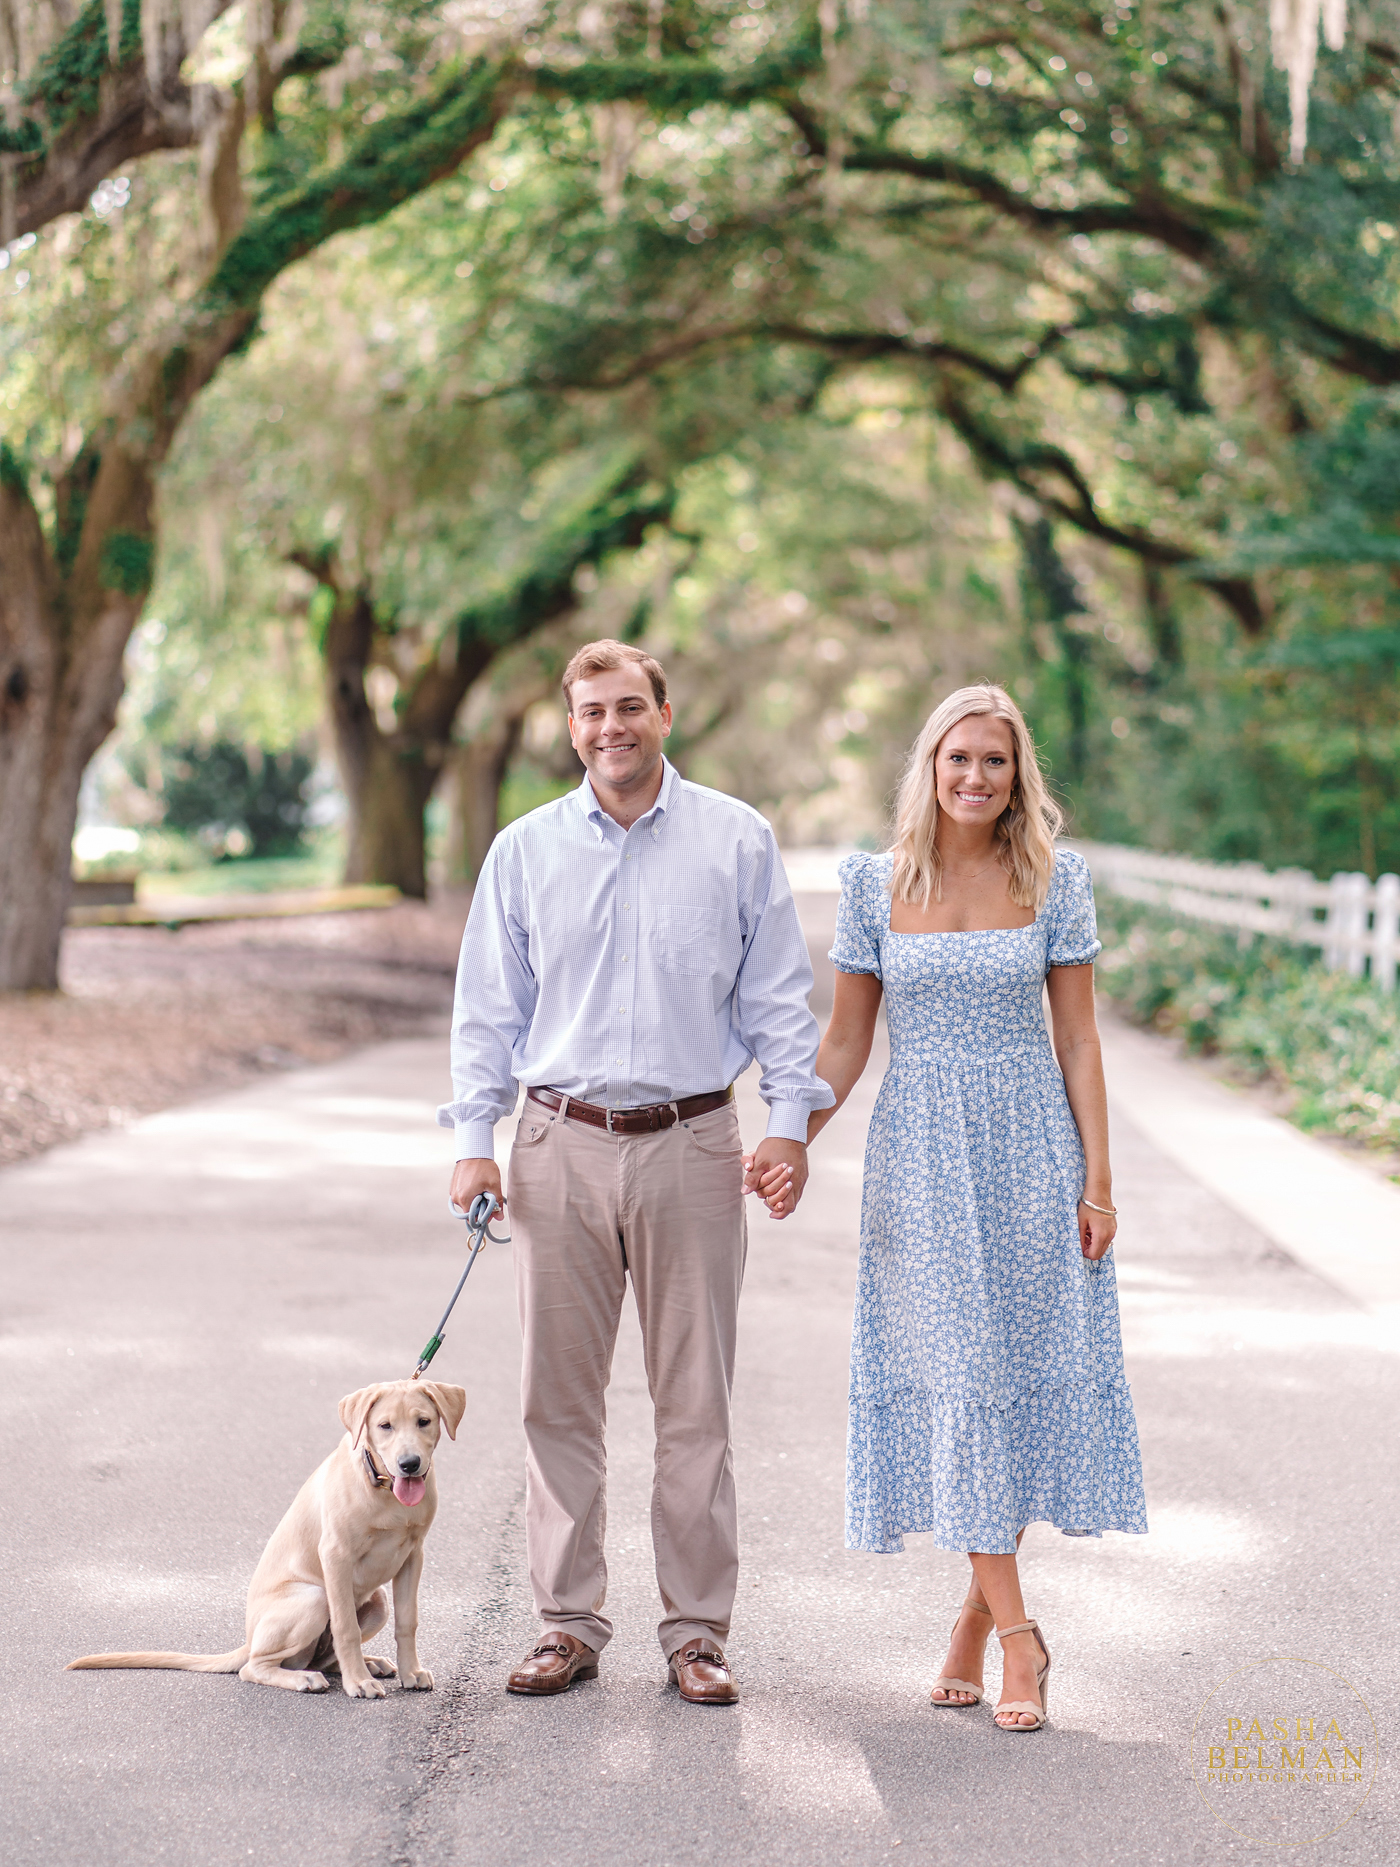 Fun Engagement Photography Session in Pawleys Island at Caledonia Golf and Fish Club